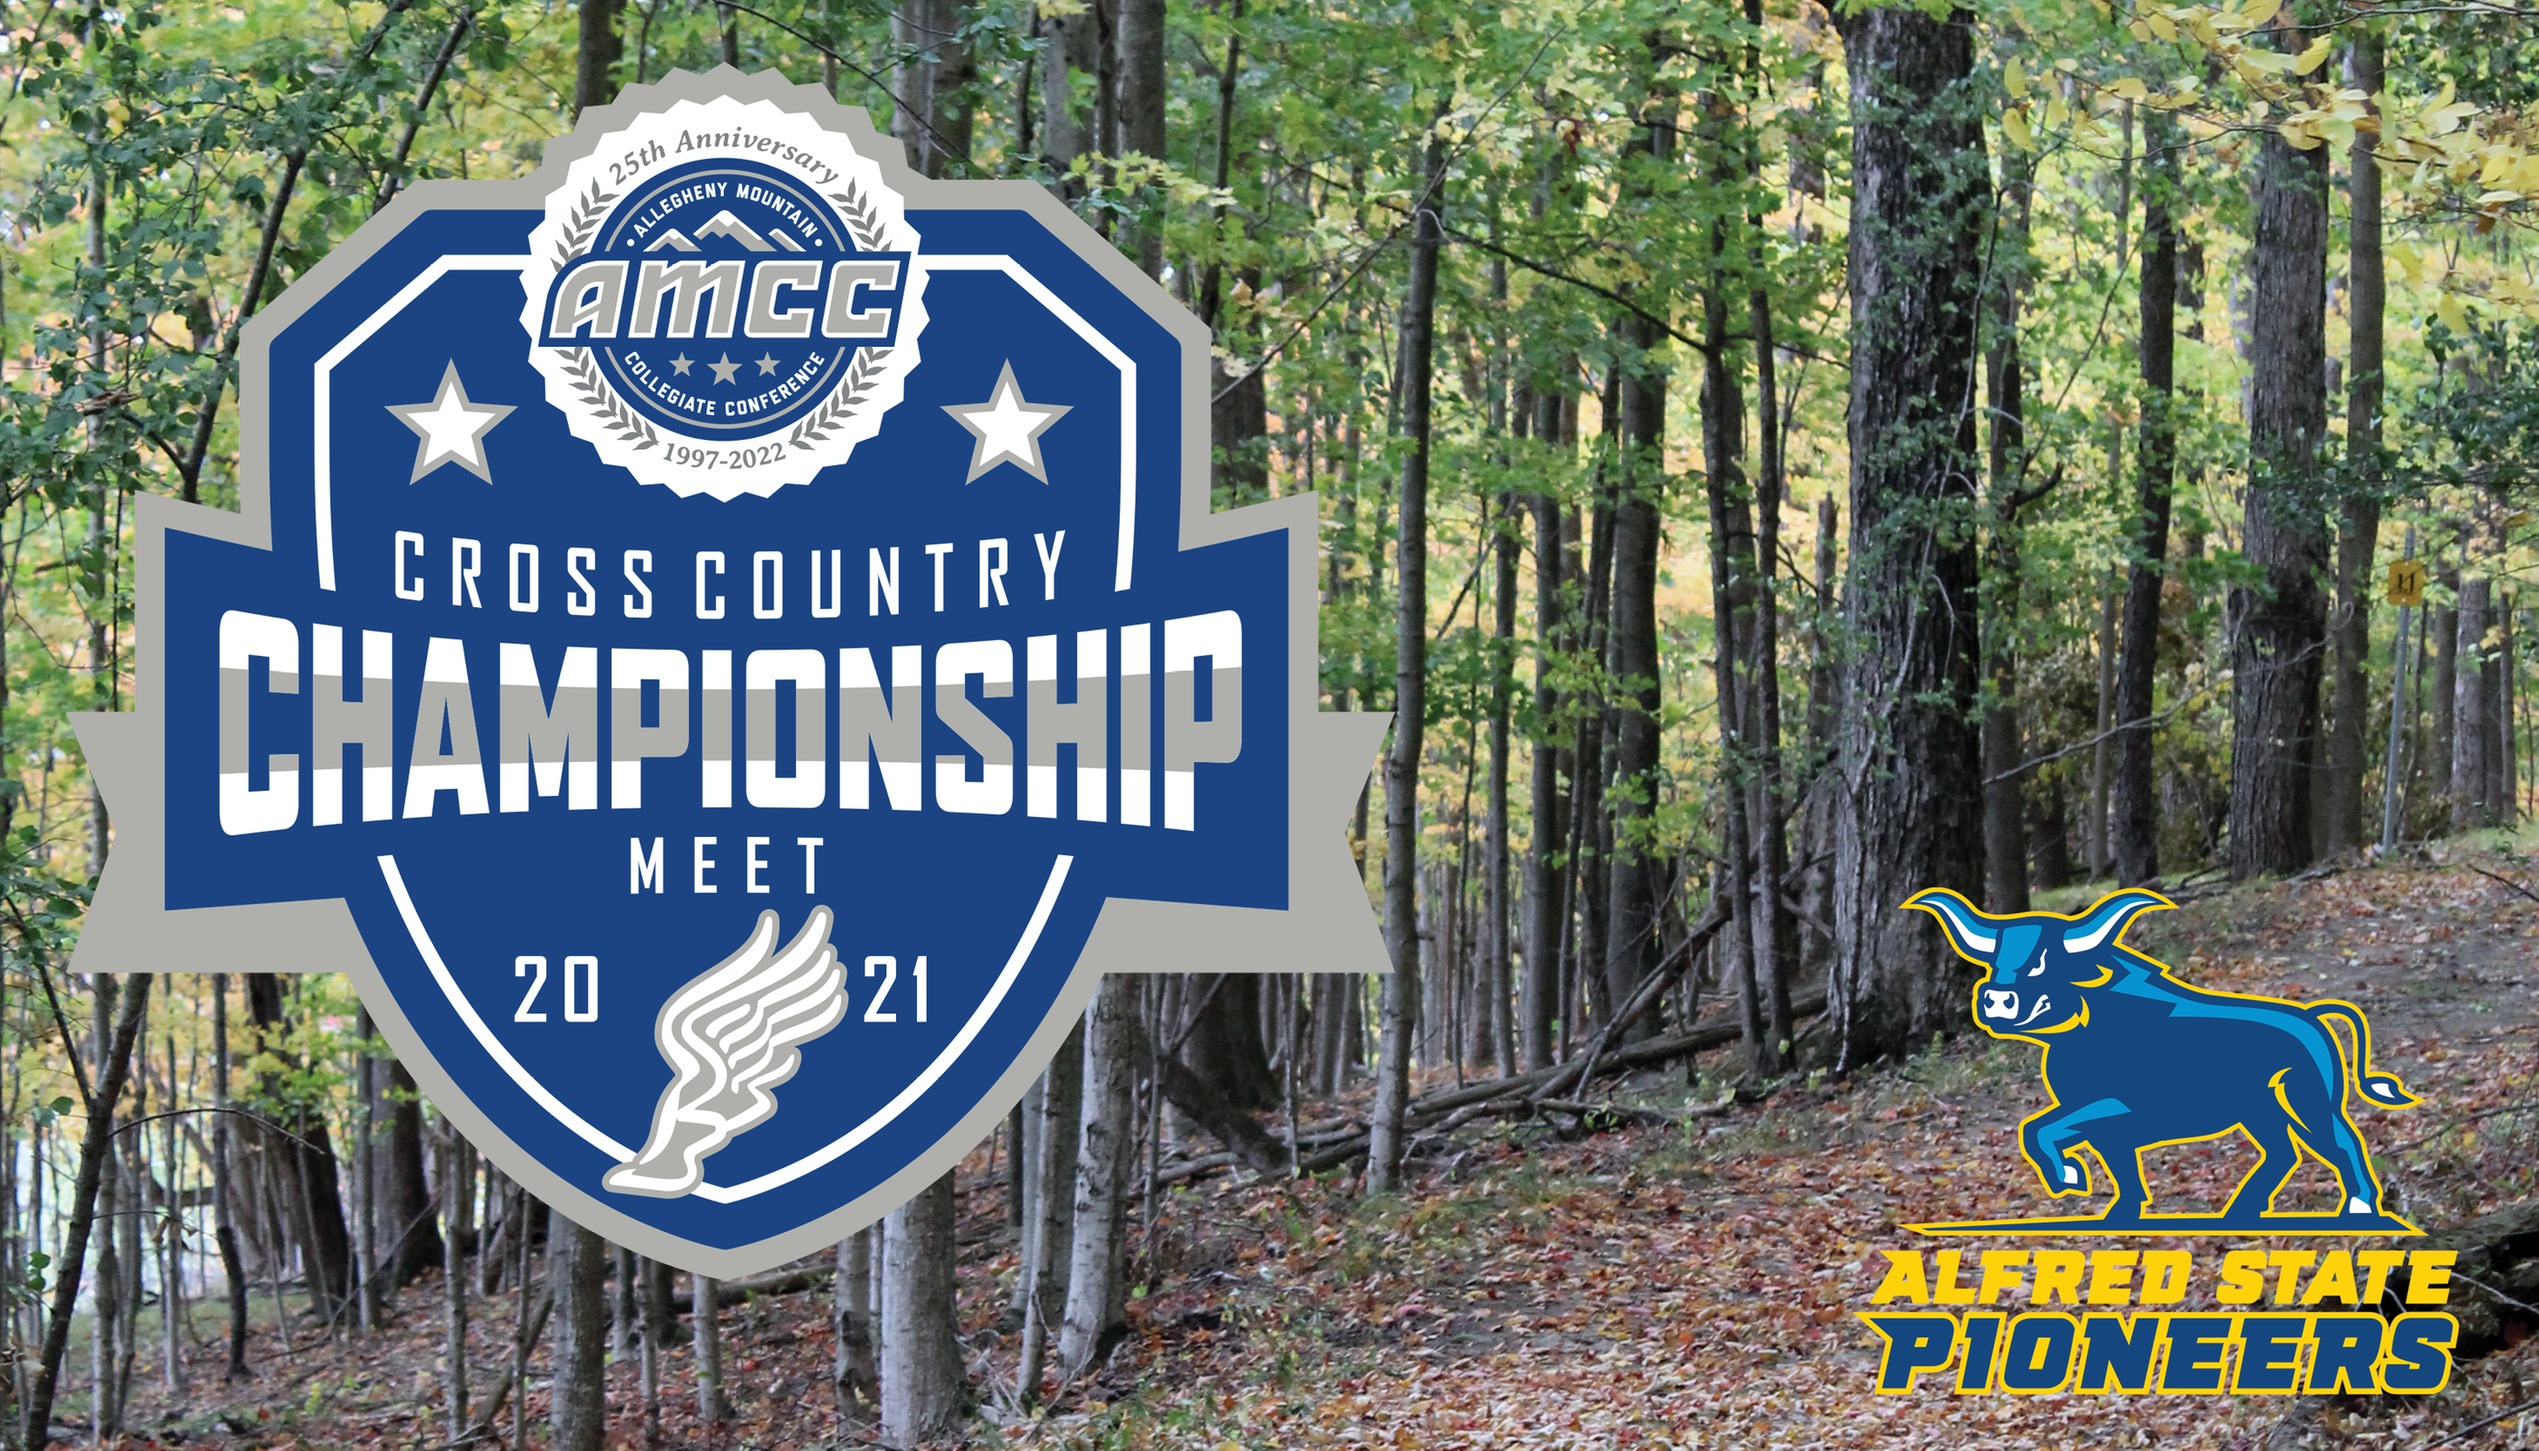 Picture of part of the cross country course with AMCC Championship logo.